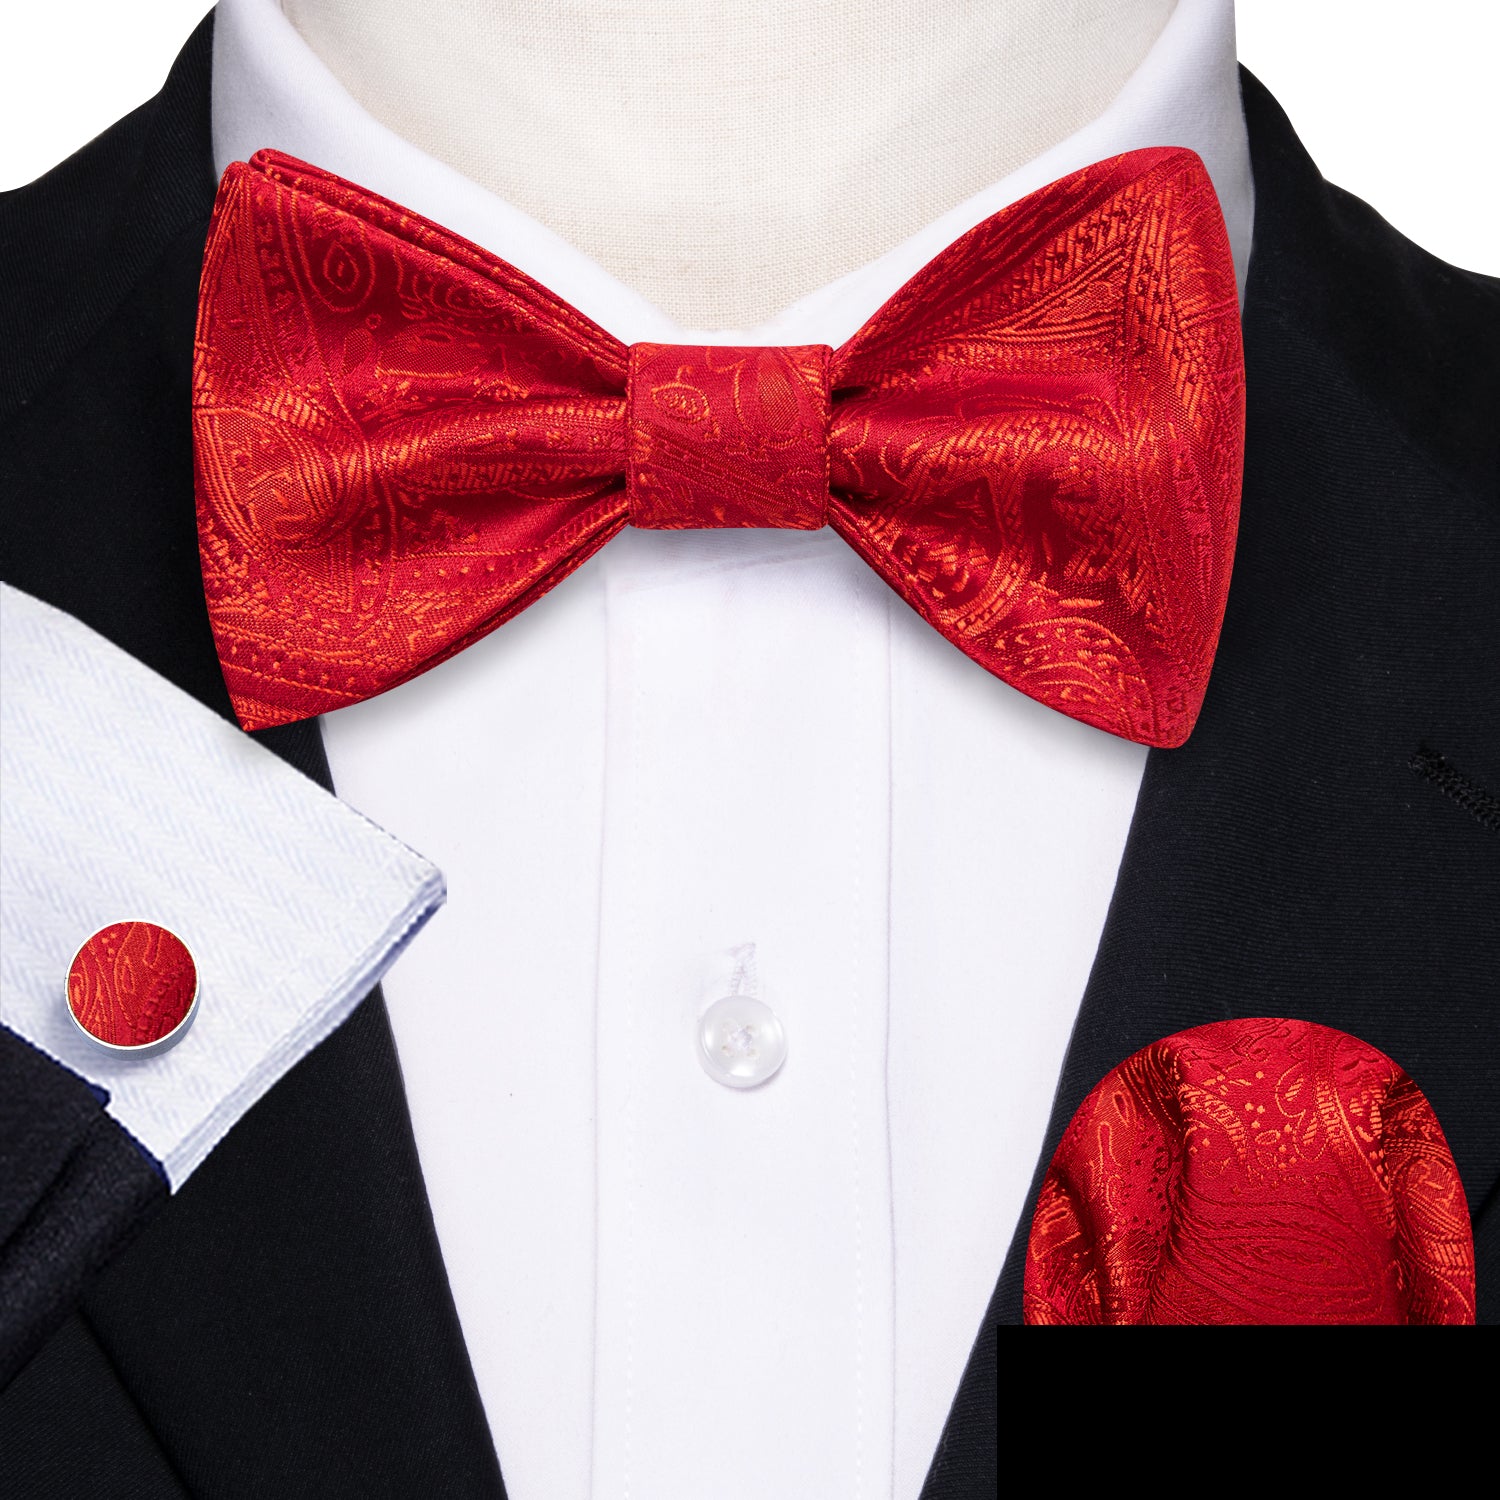 Strong Red Paisley Silk Bow Tie Hanky Cufflinks Set